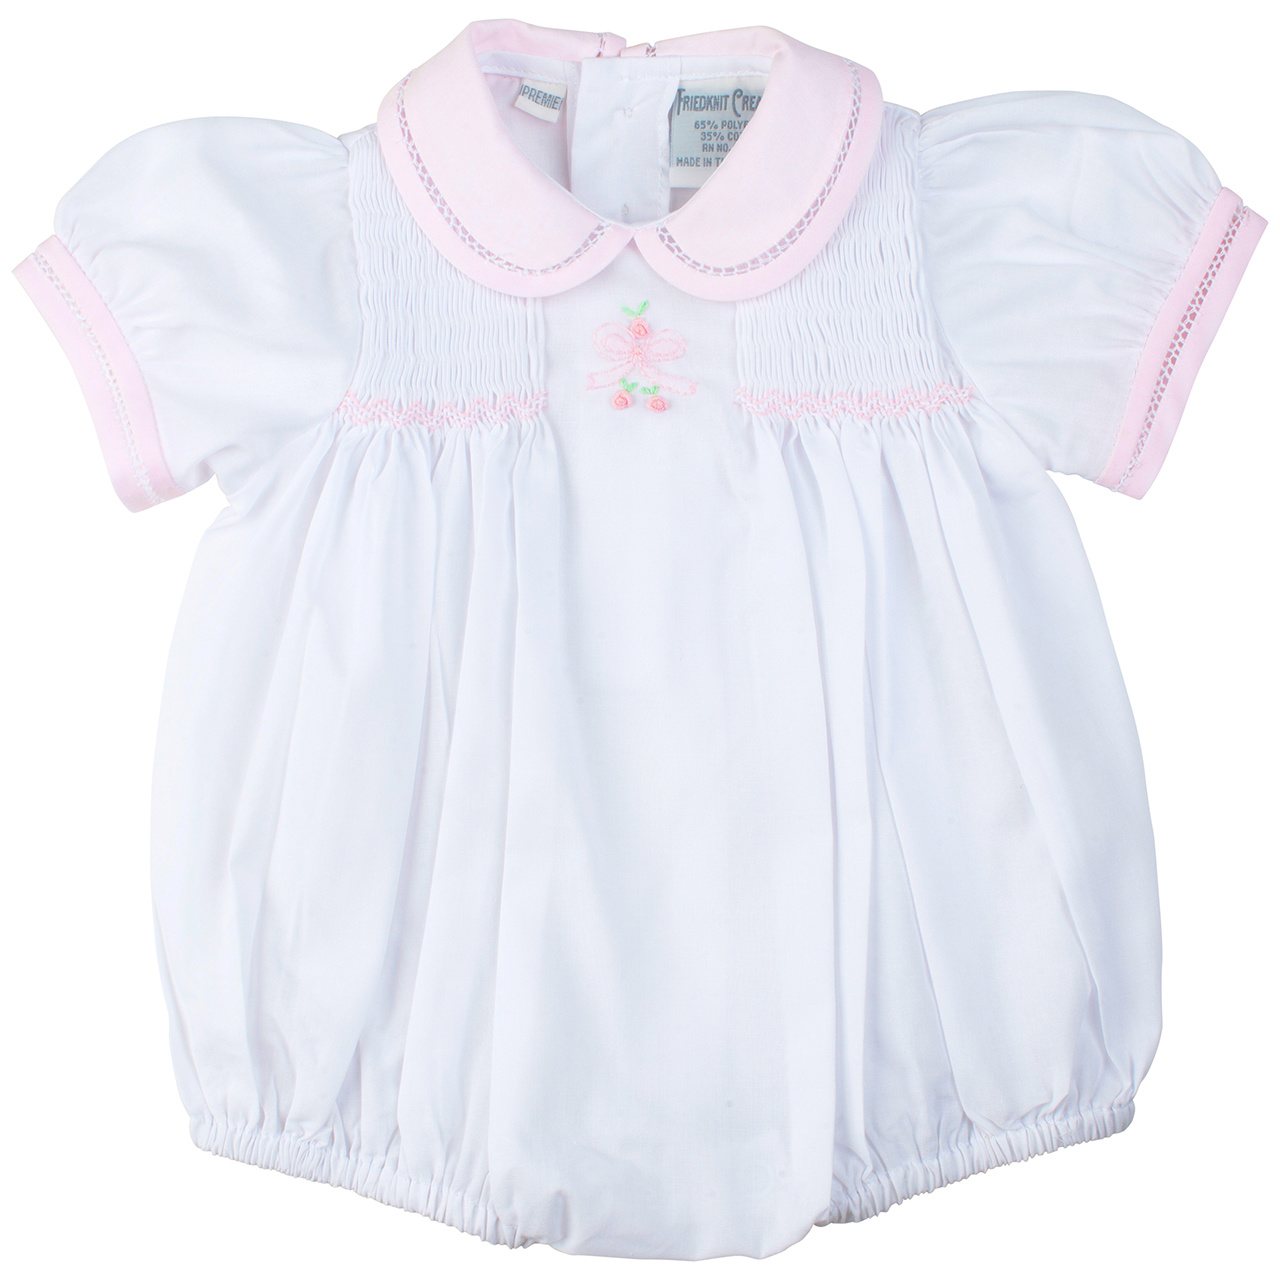 Feltman Brothers White/Pink Bow Smocked Bubble